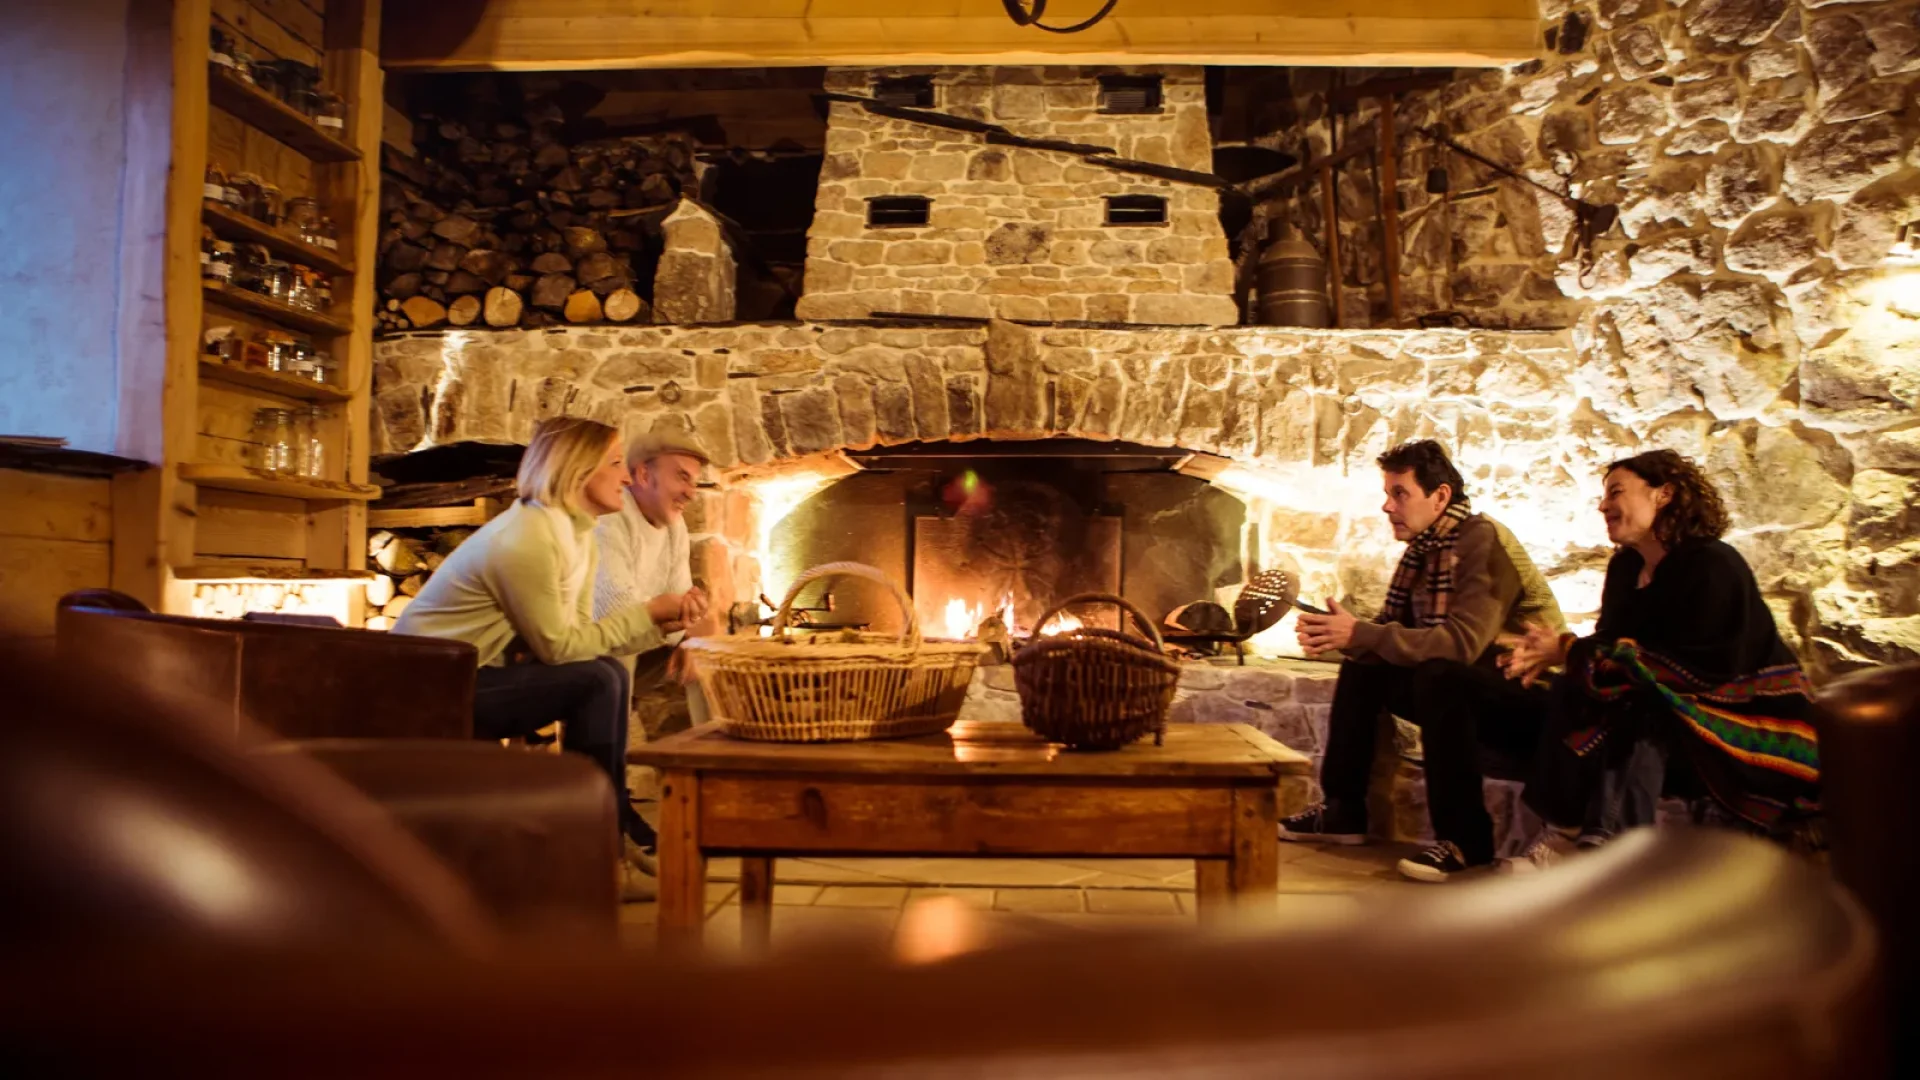 Group of friends by the fireplace, in the guest house of the "Moulin de Montabonnel", in winter